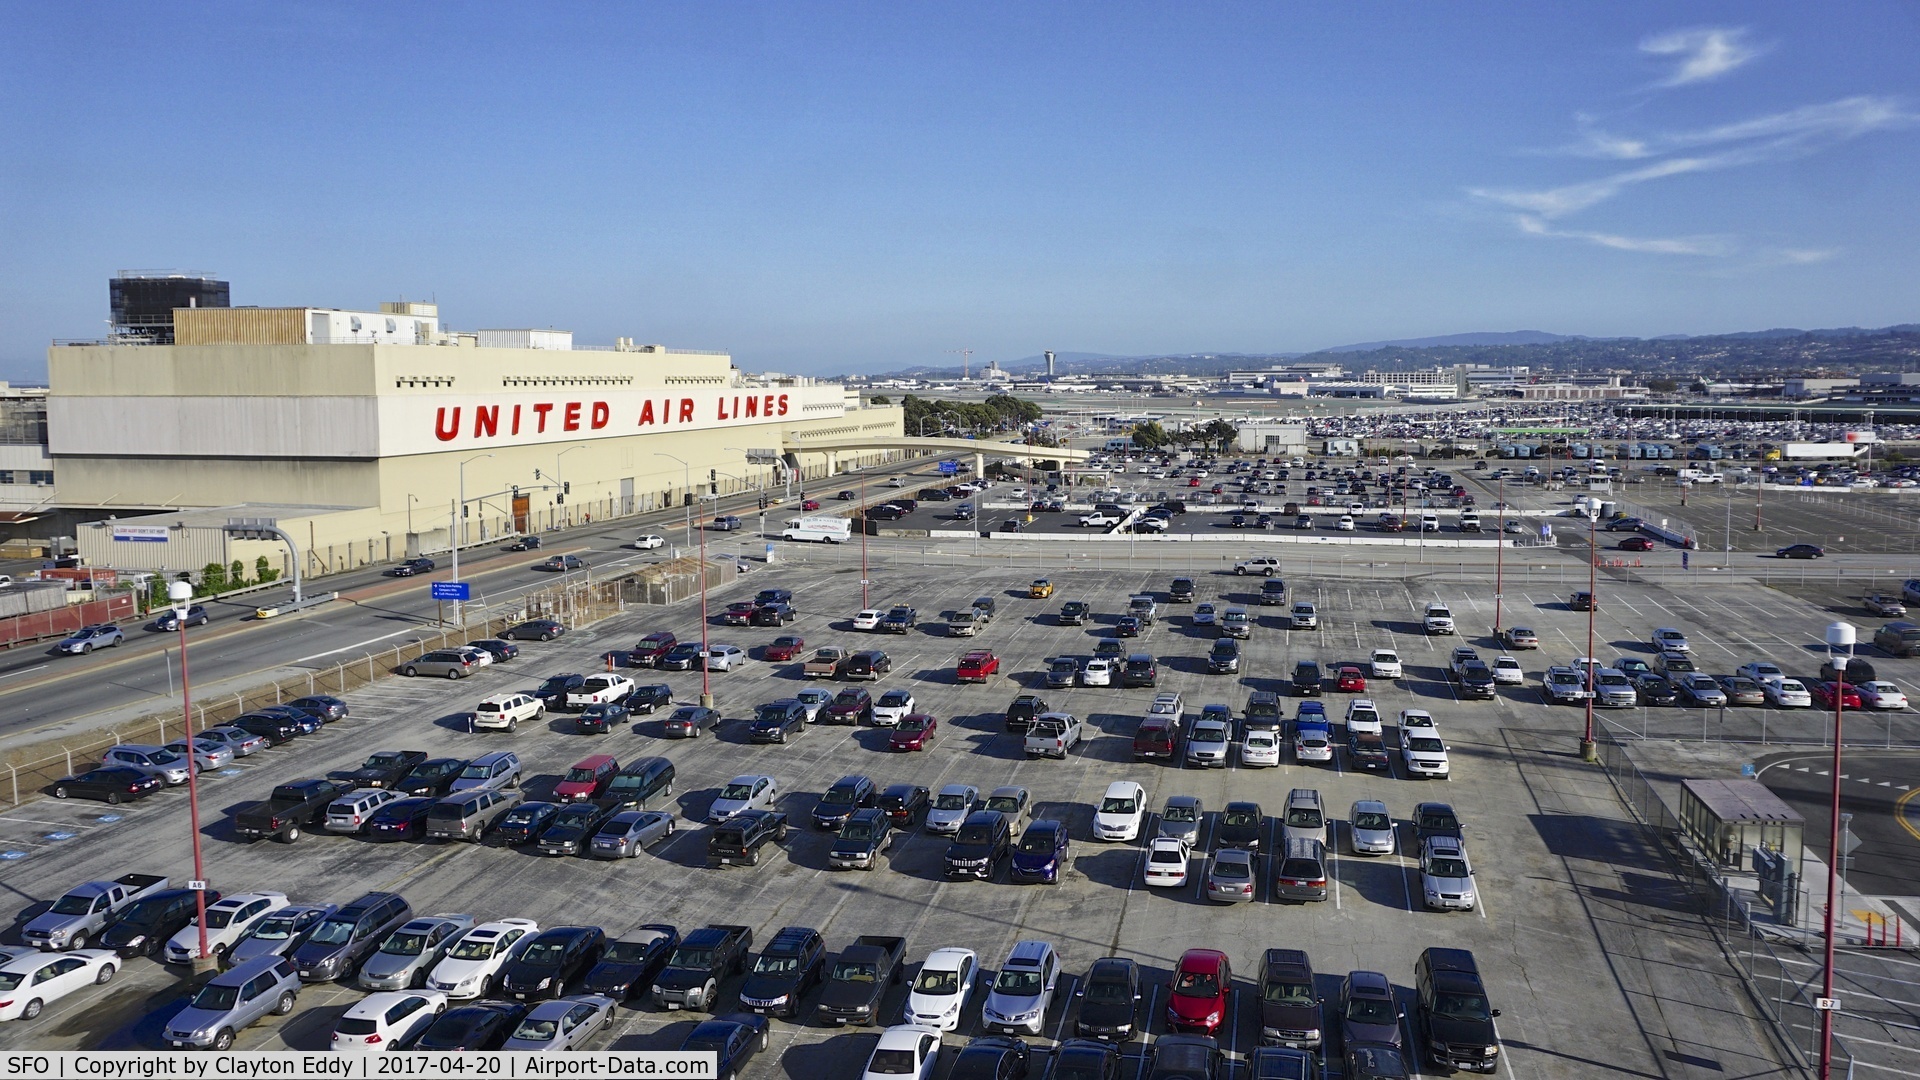 San Francisco International Airport (SFO) - United Airlines maintenance base, and the dismantling of the old ATC towers in the background. 2017.